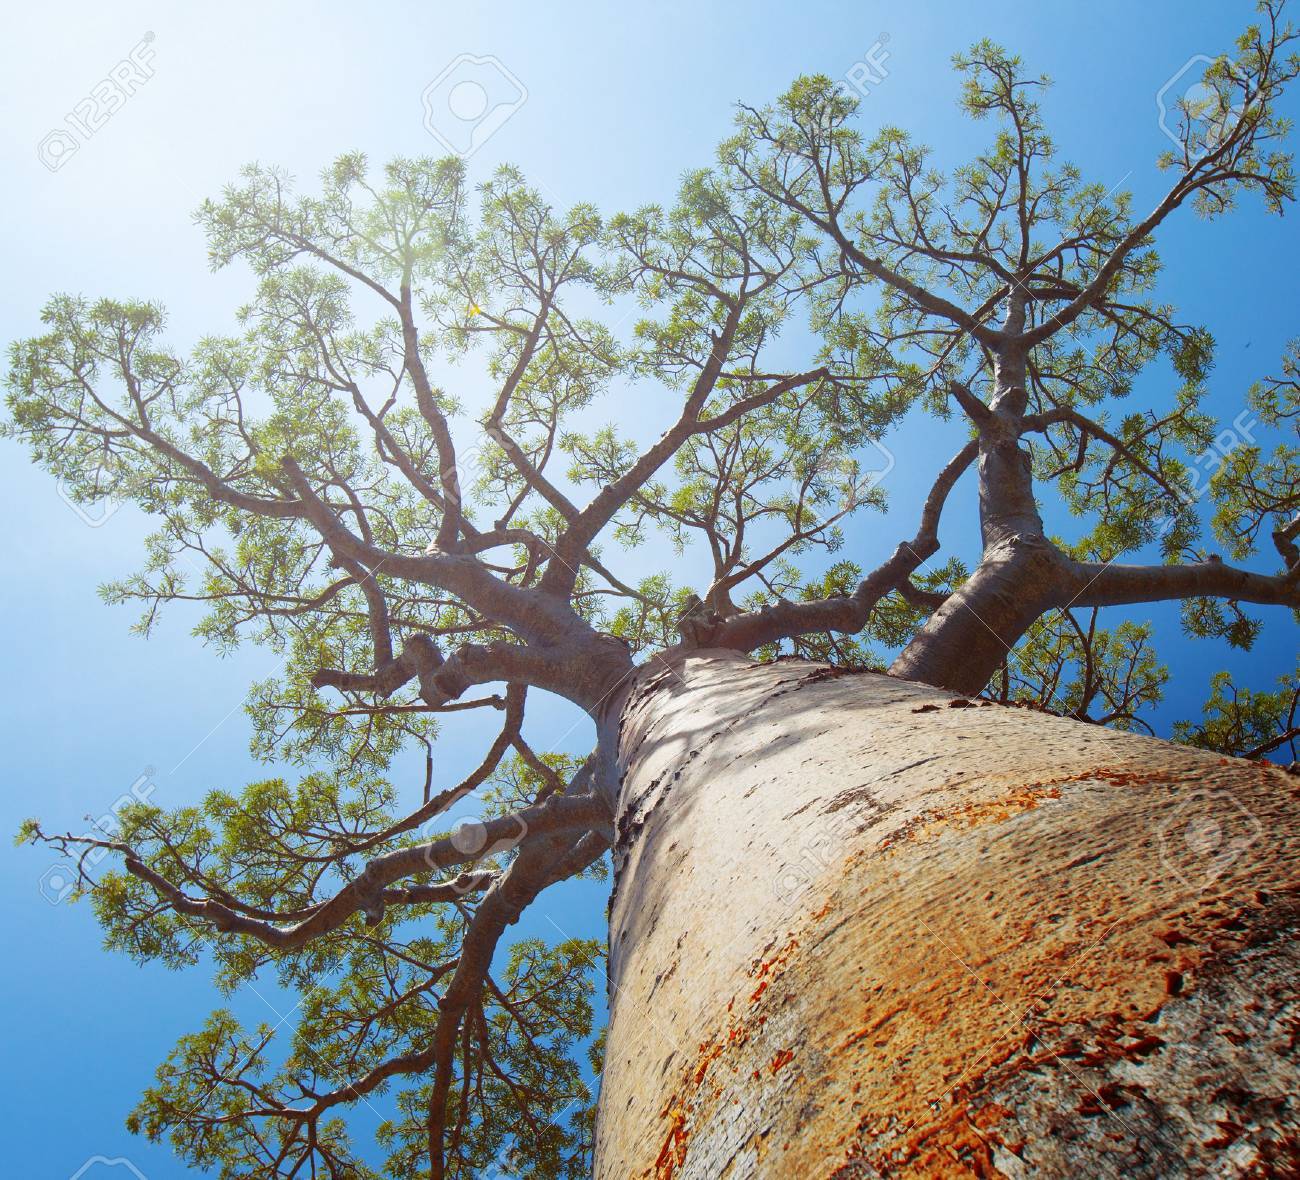 Baobab Tree With Green Leaves On A Blue Clear Sky Background